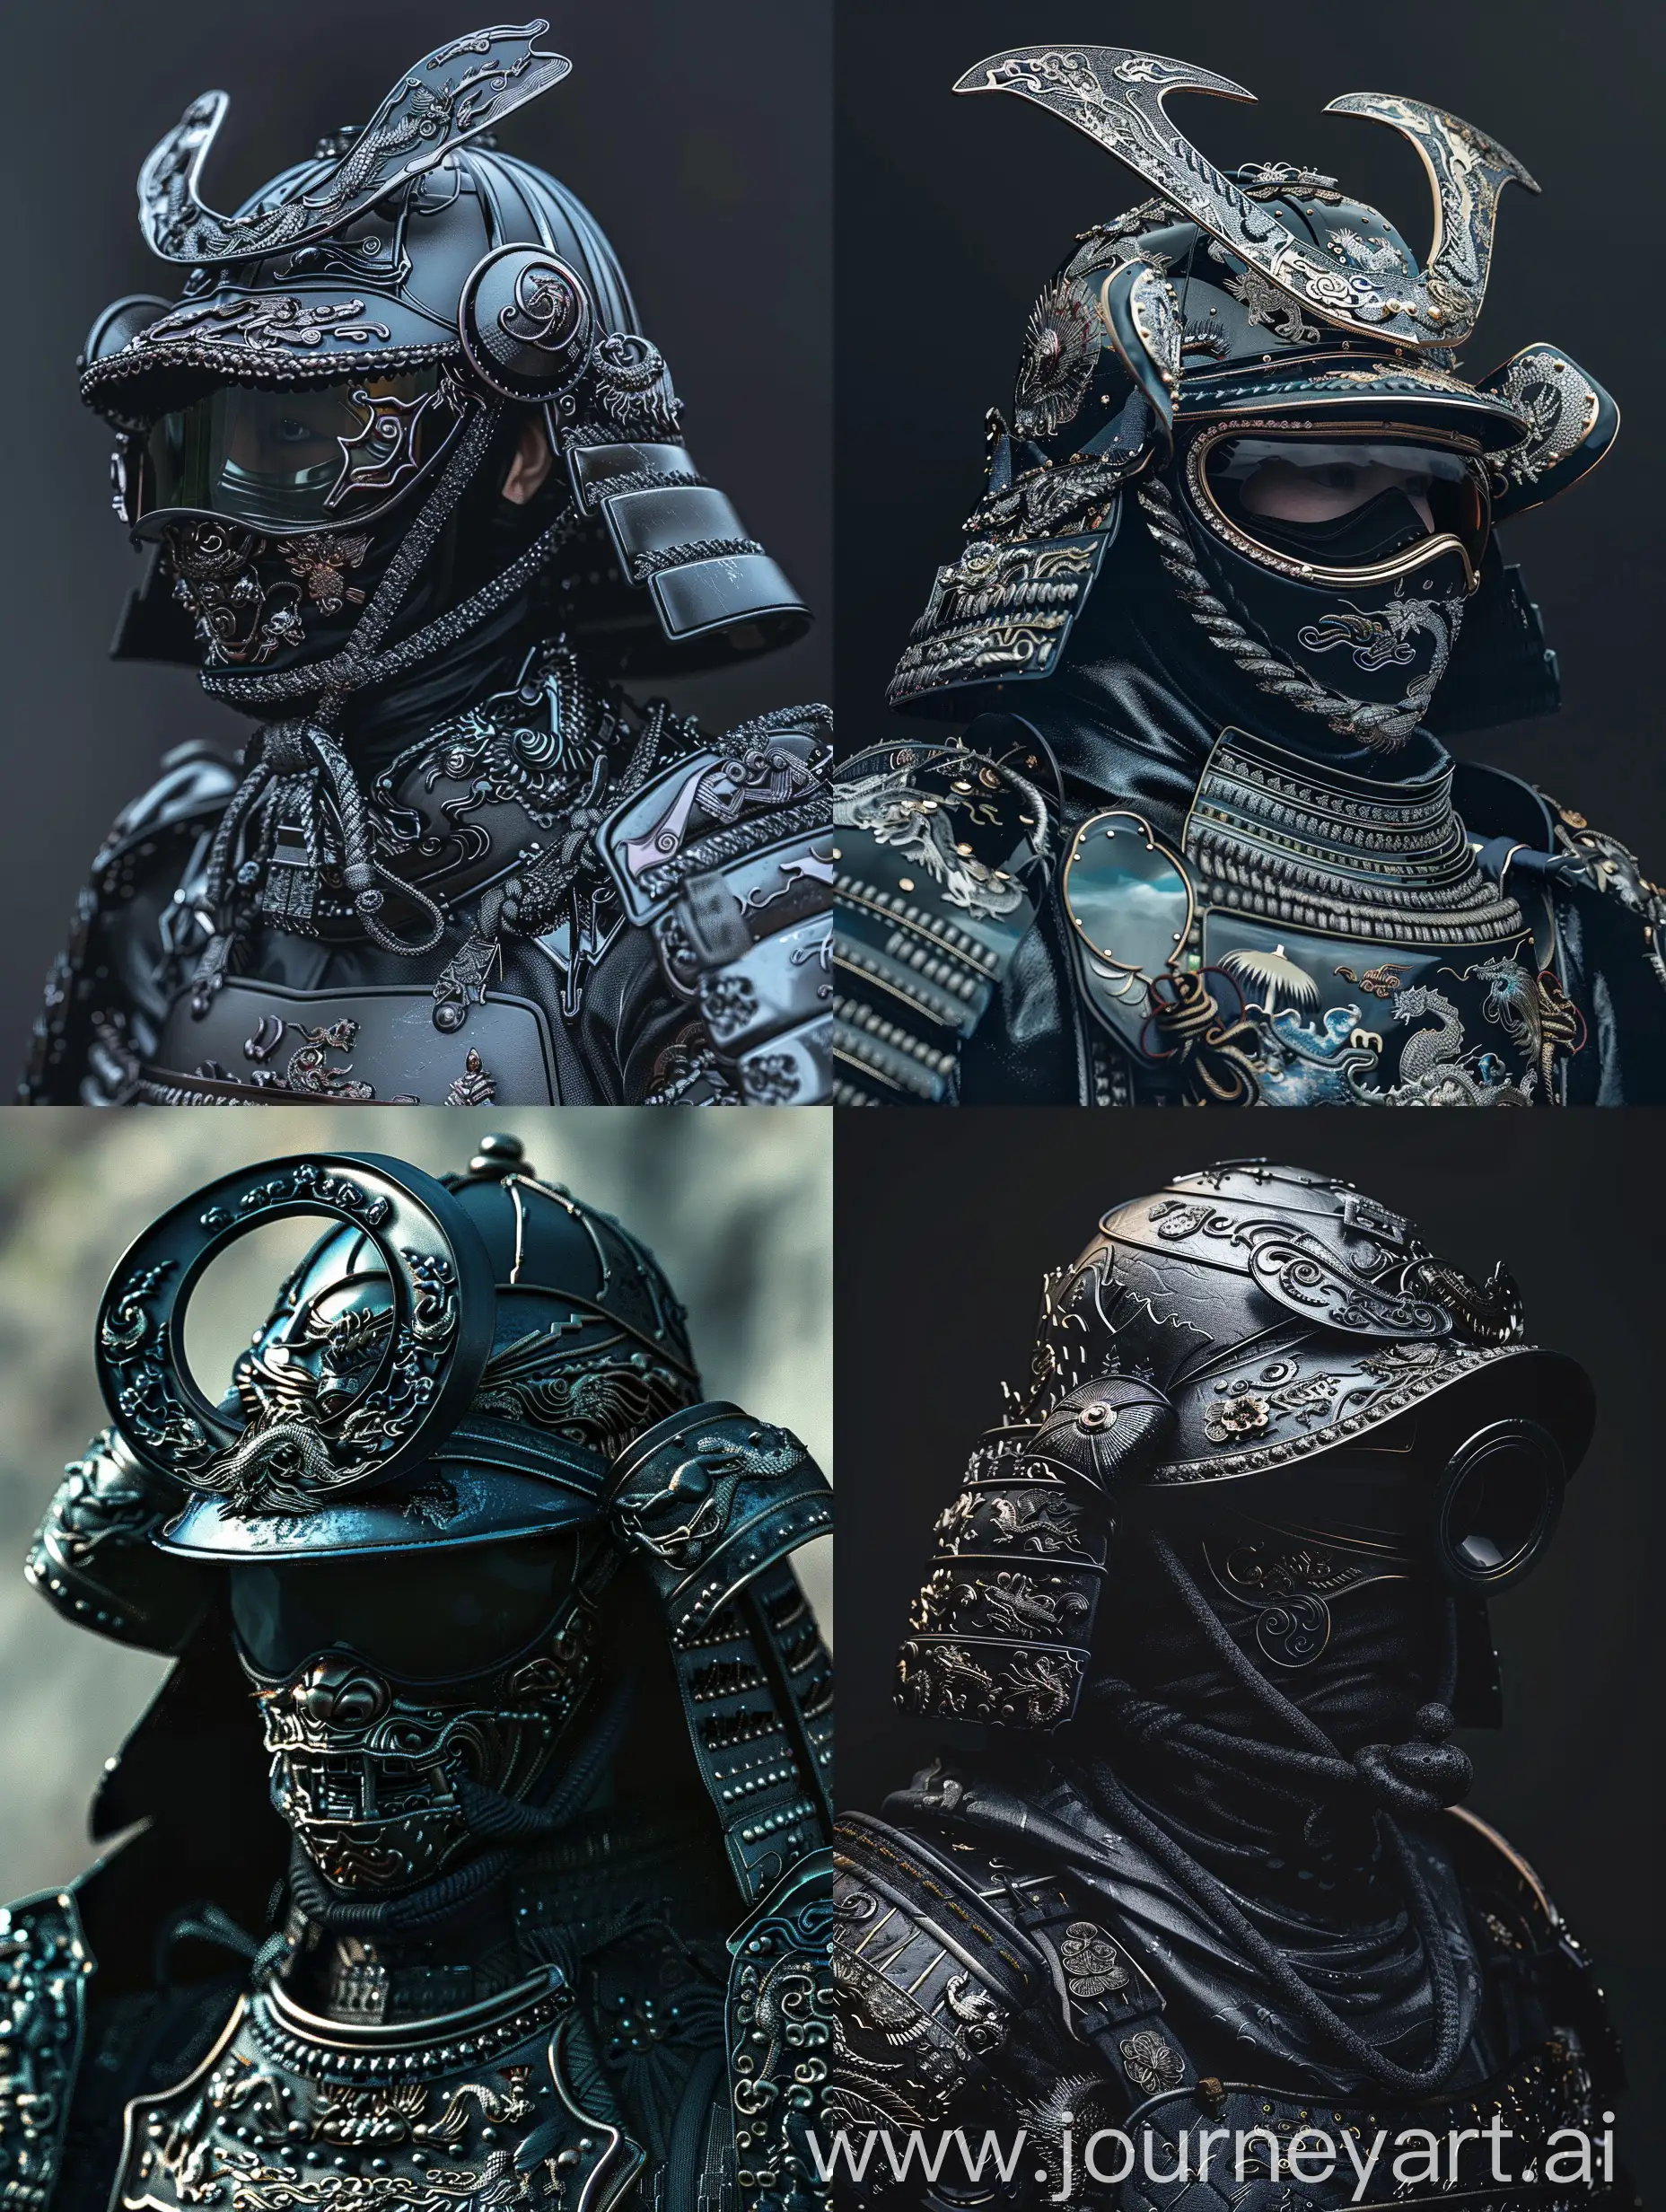 A realistic samurai warrior wears an elaborate precious suit of armor in various shades of black. The helmet features intricate decorations with Chinese elements, a large, curved crest, and detailed embellishments. The mask and armor plates are adorned with delicate patterns, including and dragons, and the samurai's face is partially hidden behind tinted goggles. The overall color scheme is predominantly black, creating a visually striking and unique look. The armor gleams as if it were brand new."